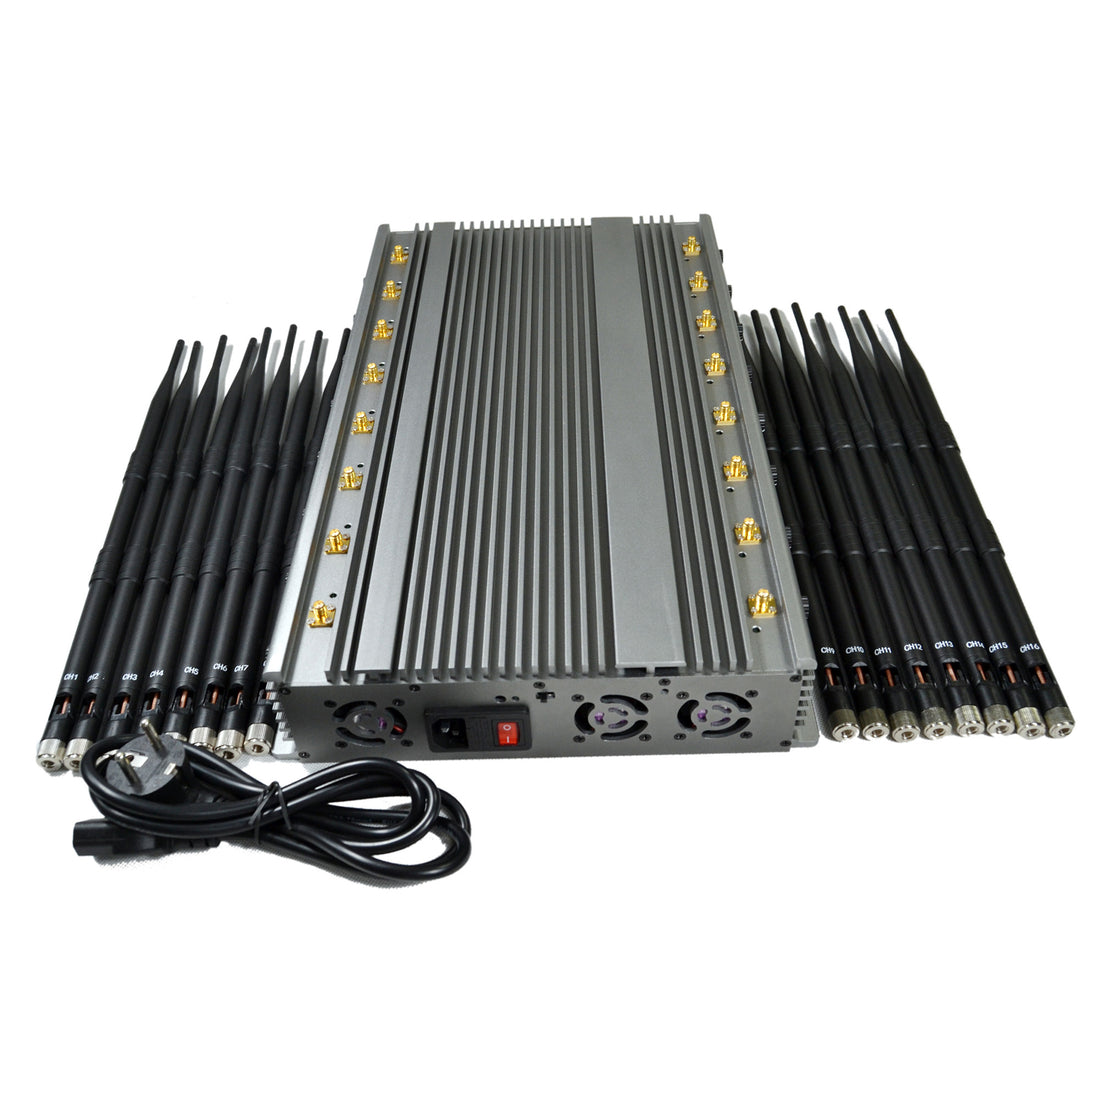 What should I know before choosing an exam room signal jammer?